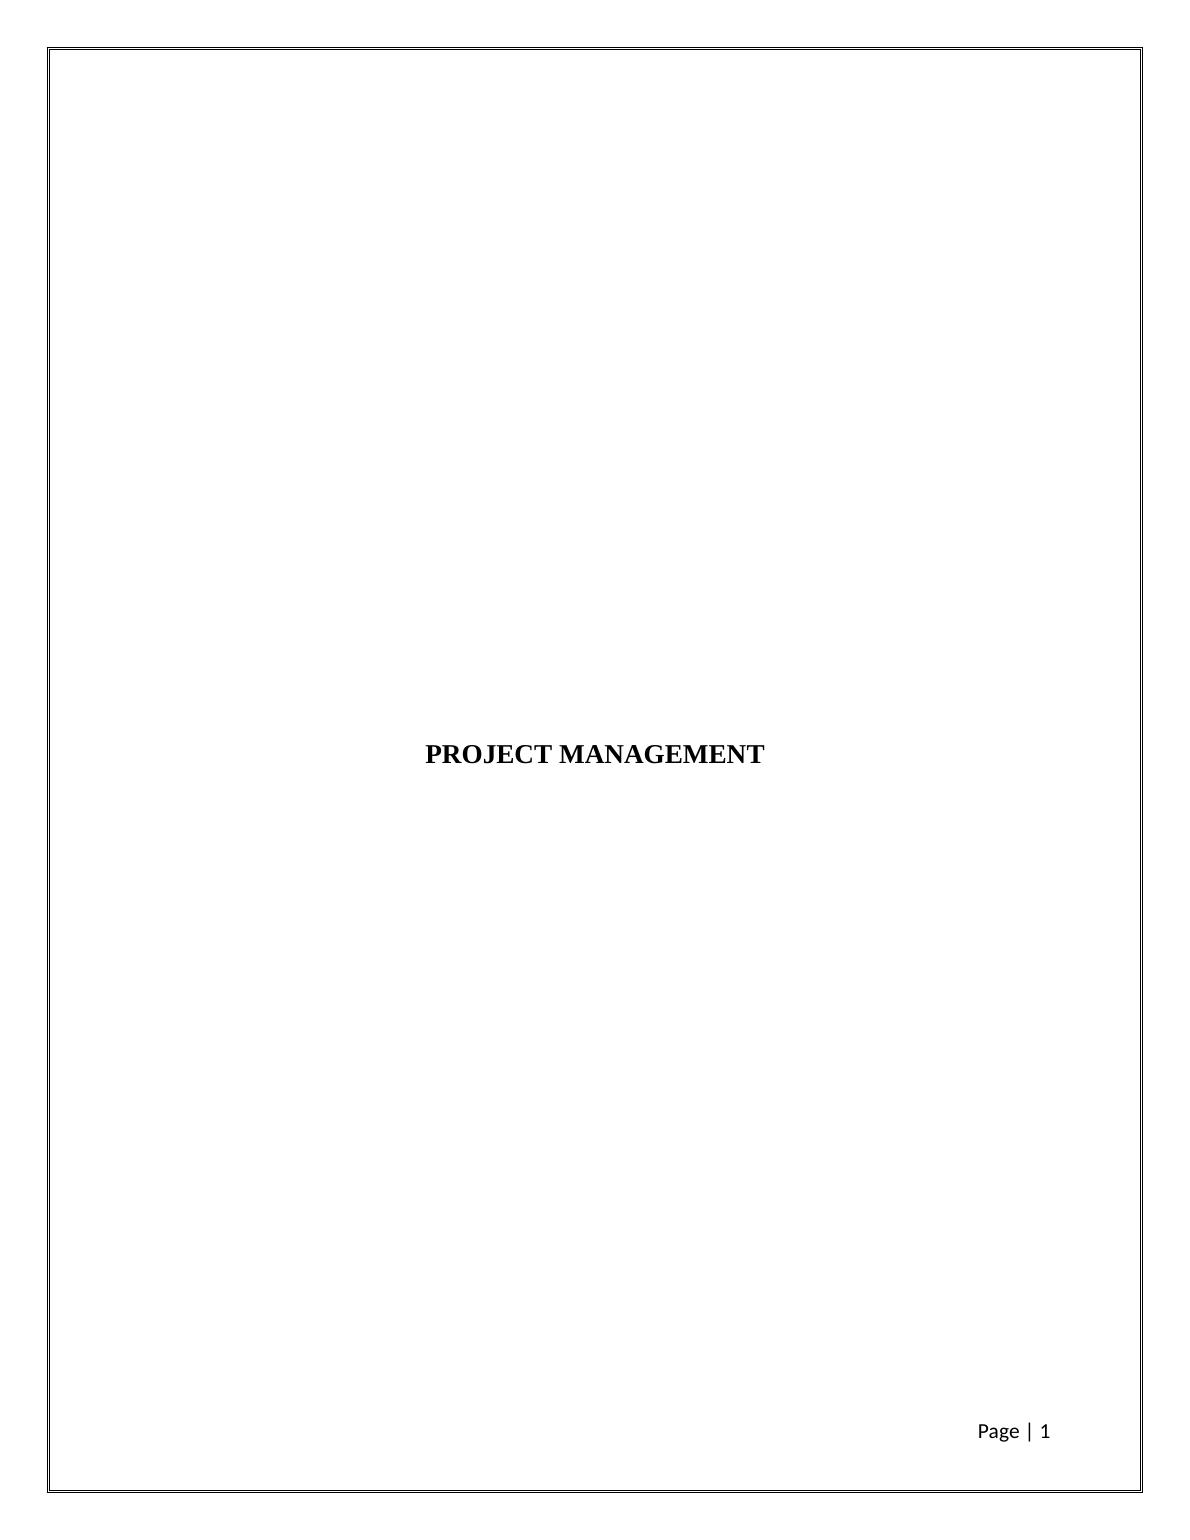 Assignment - Project Management_1